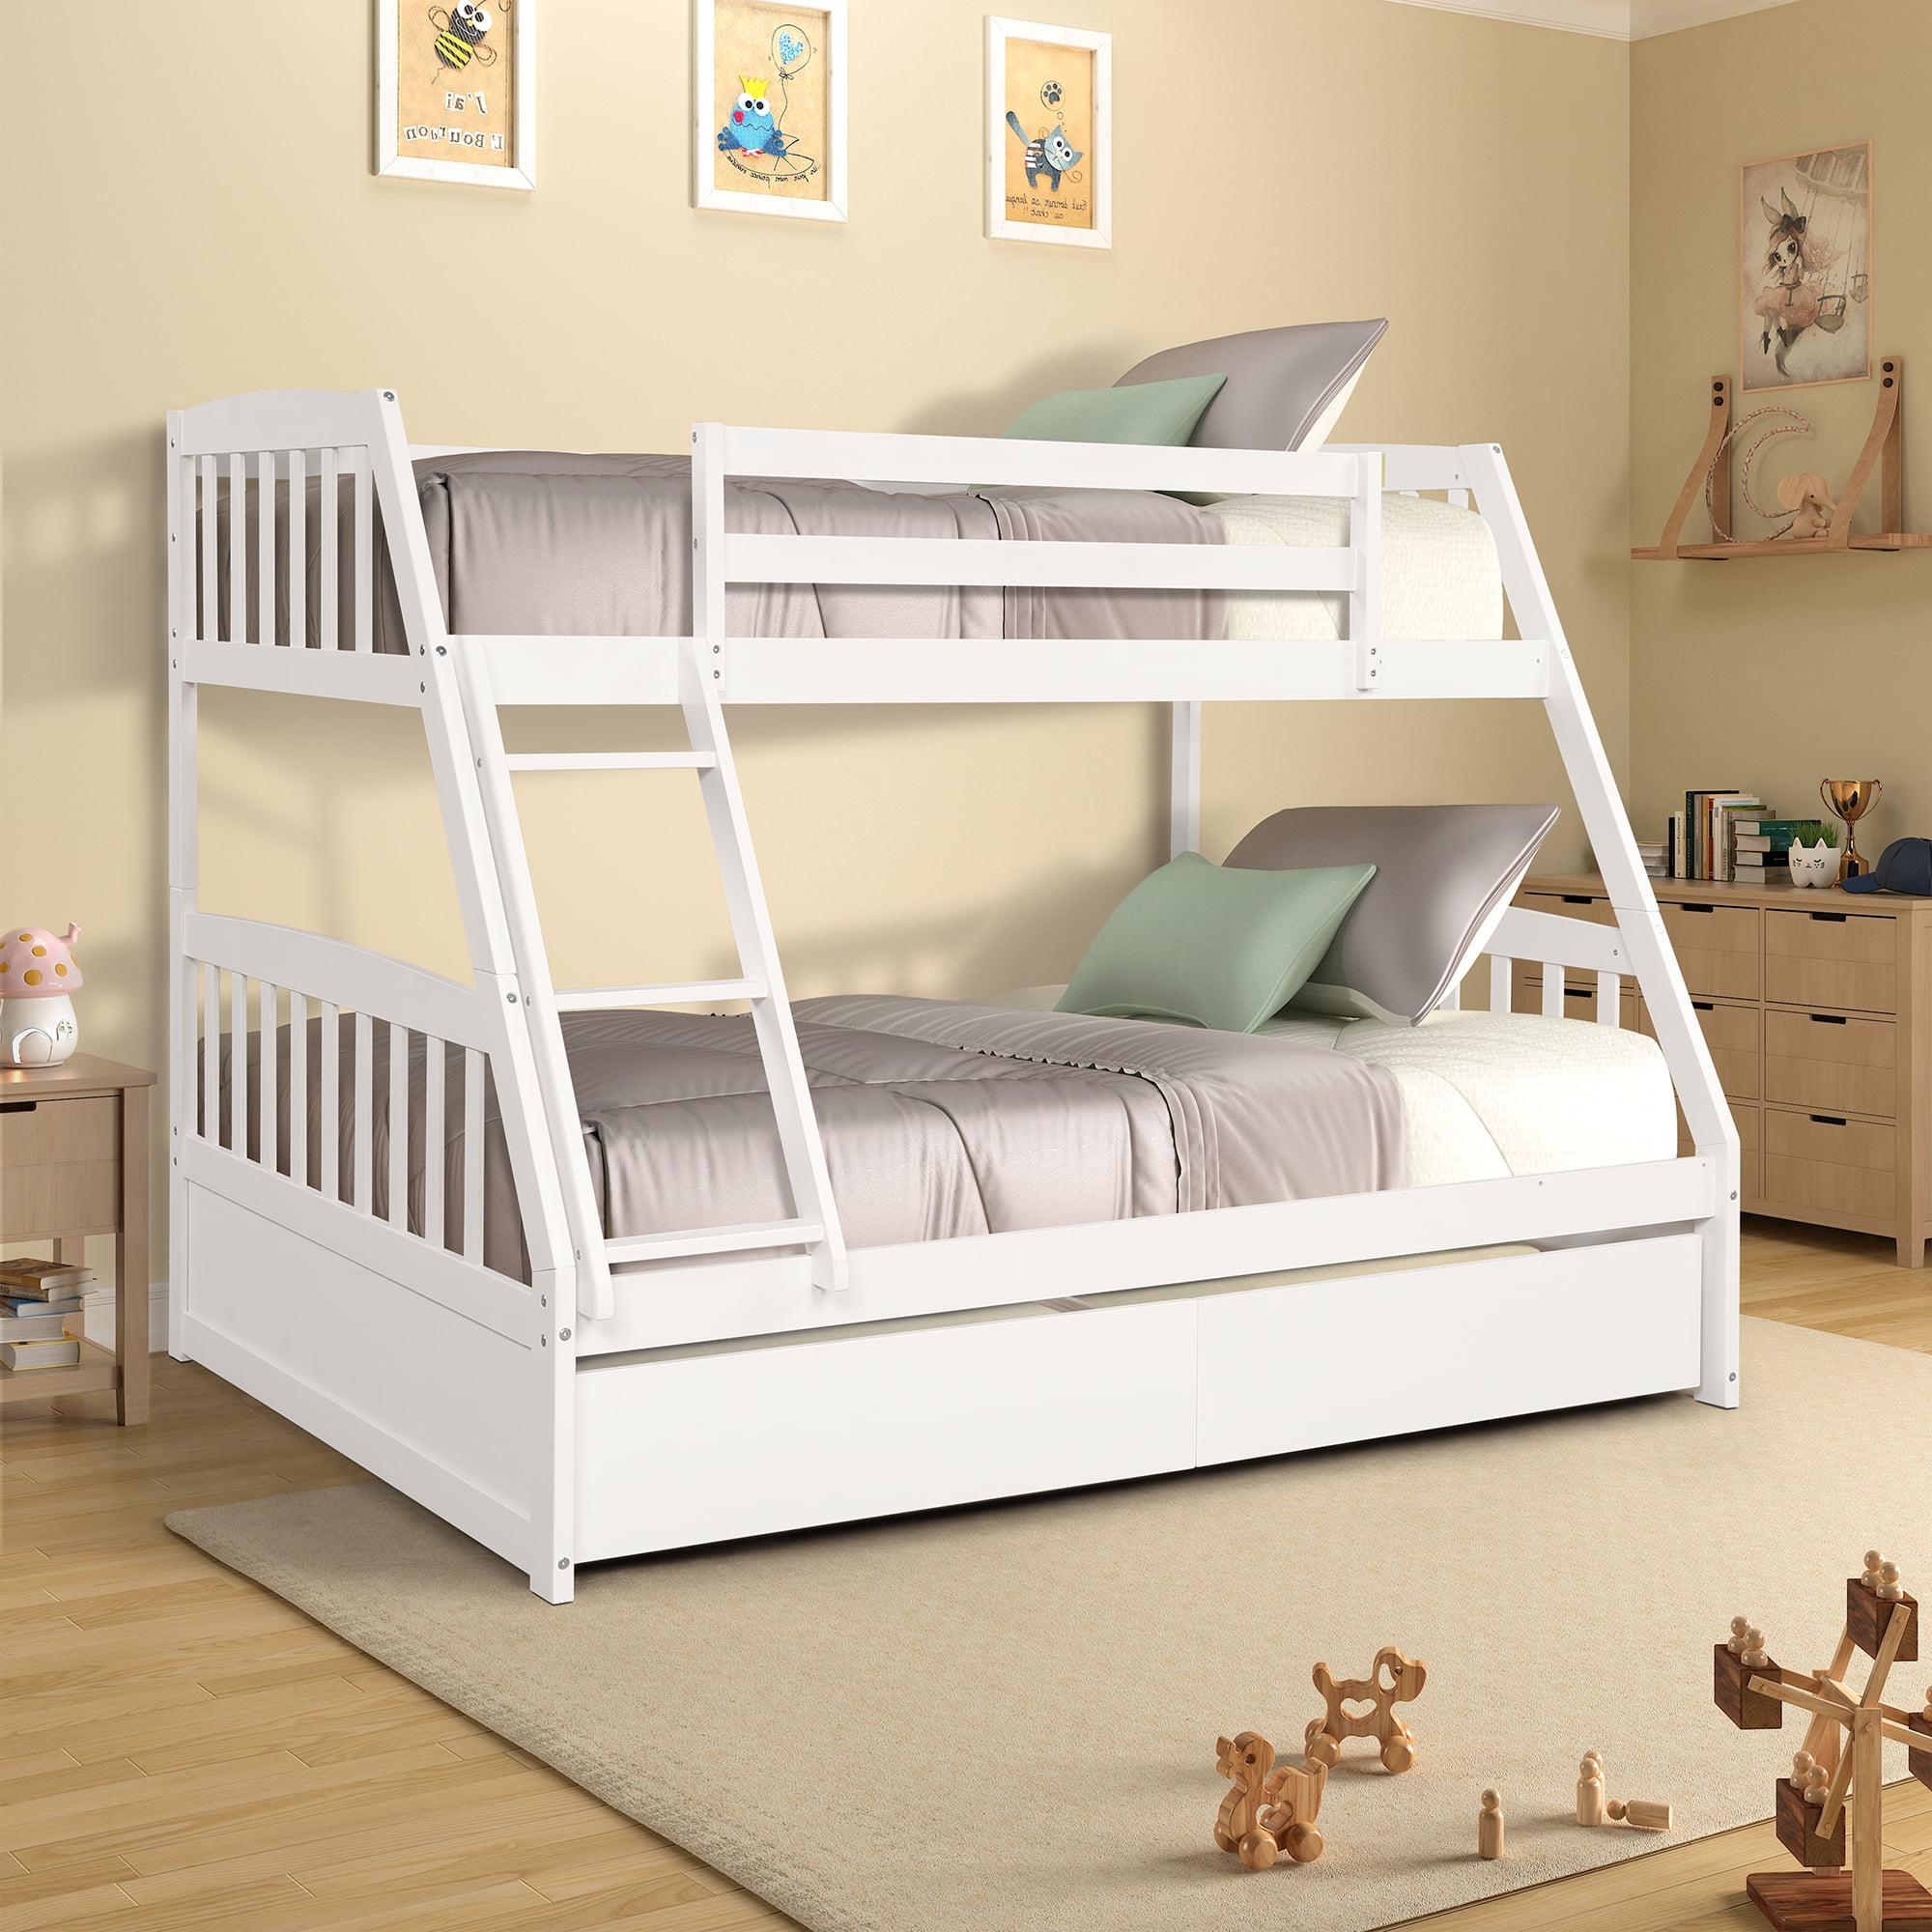 Solid Wood Twin Over Full Bunk Bed, Solid Wood Bunk Beds Twin Over Full